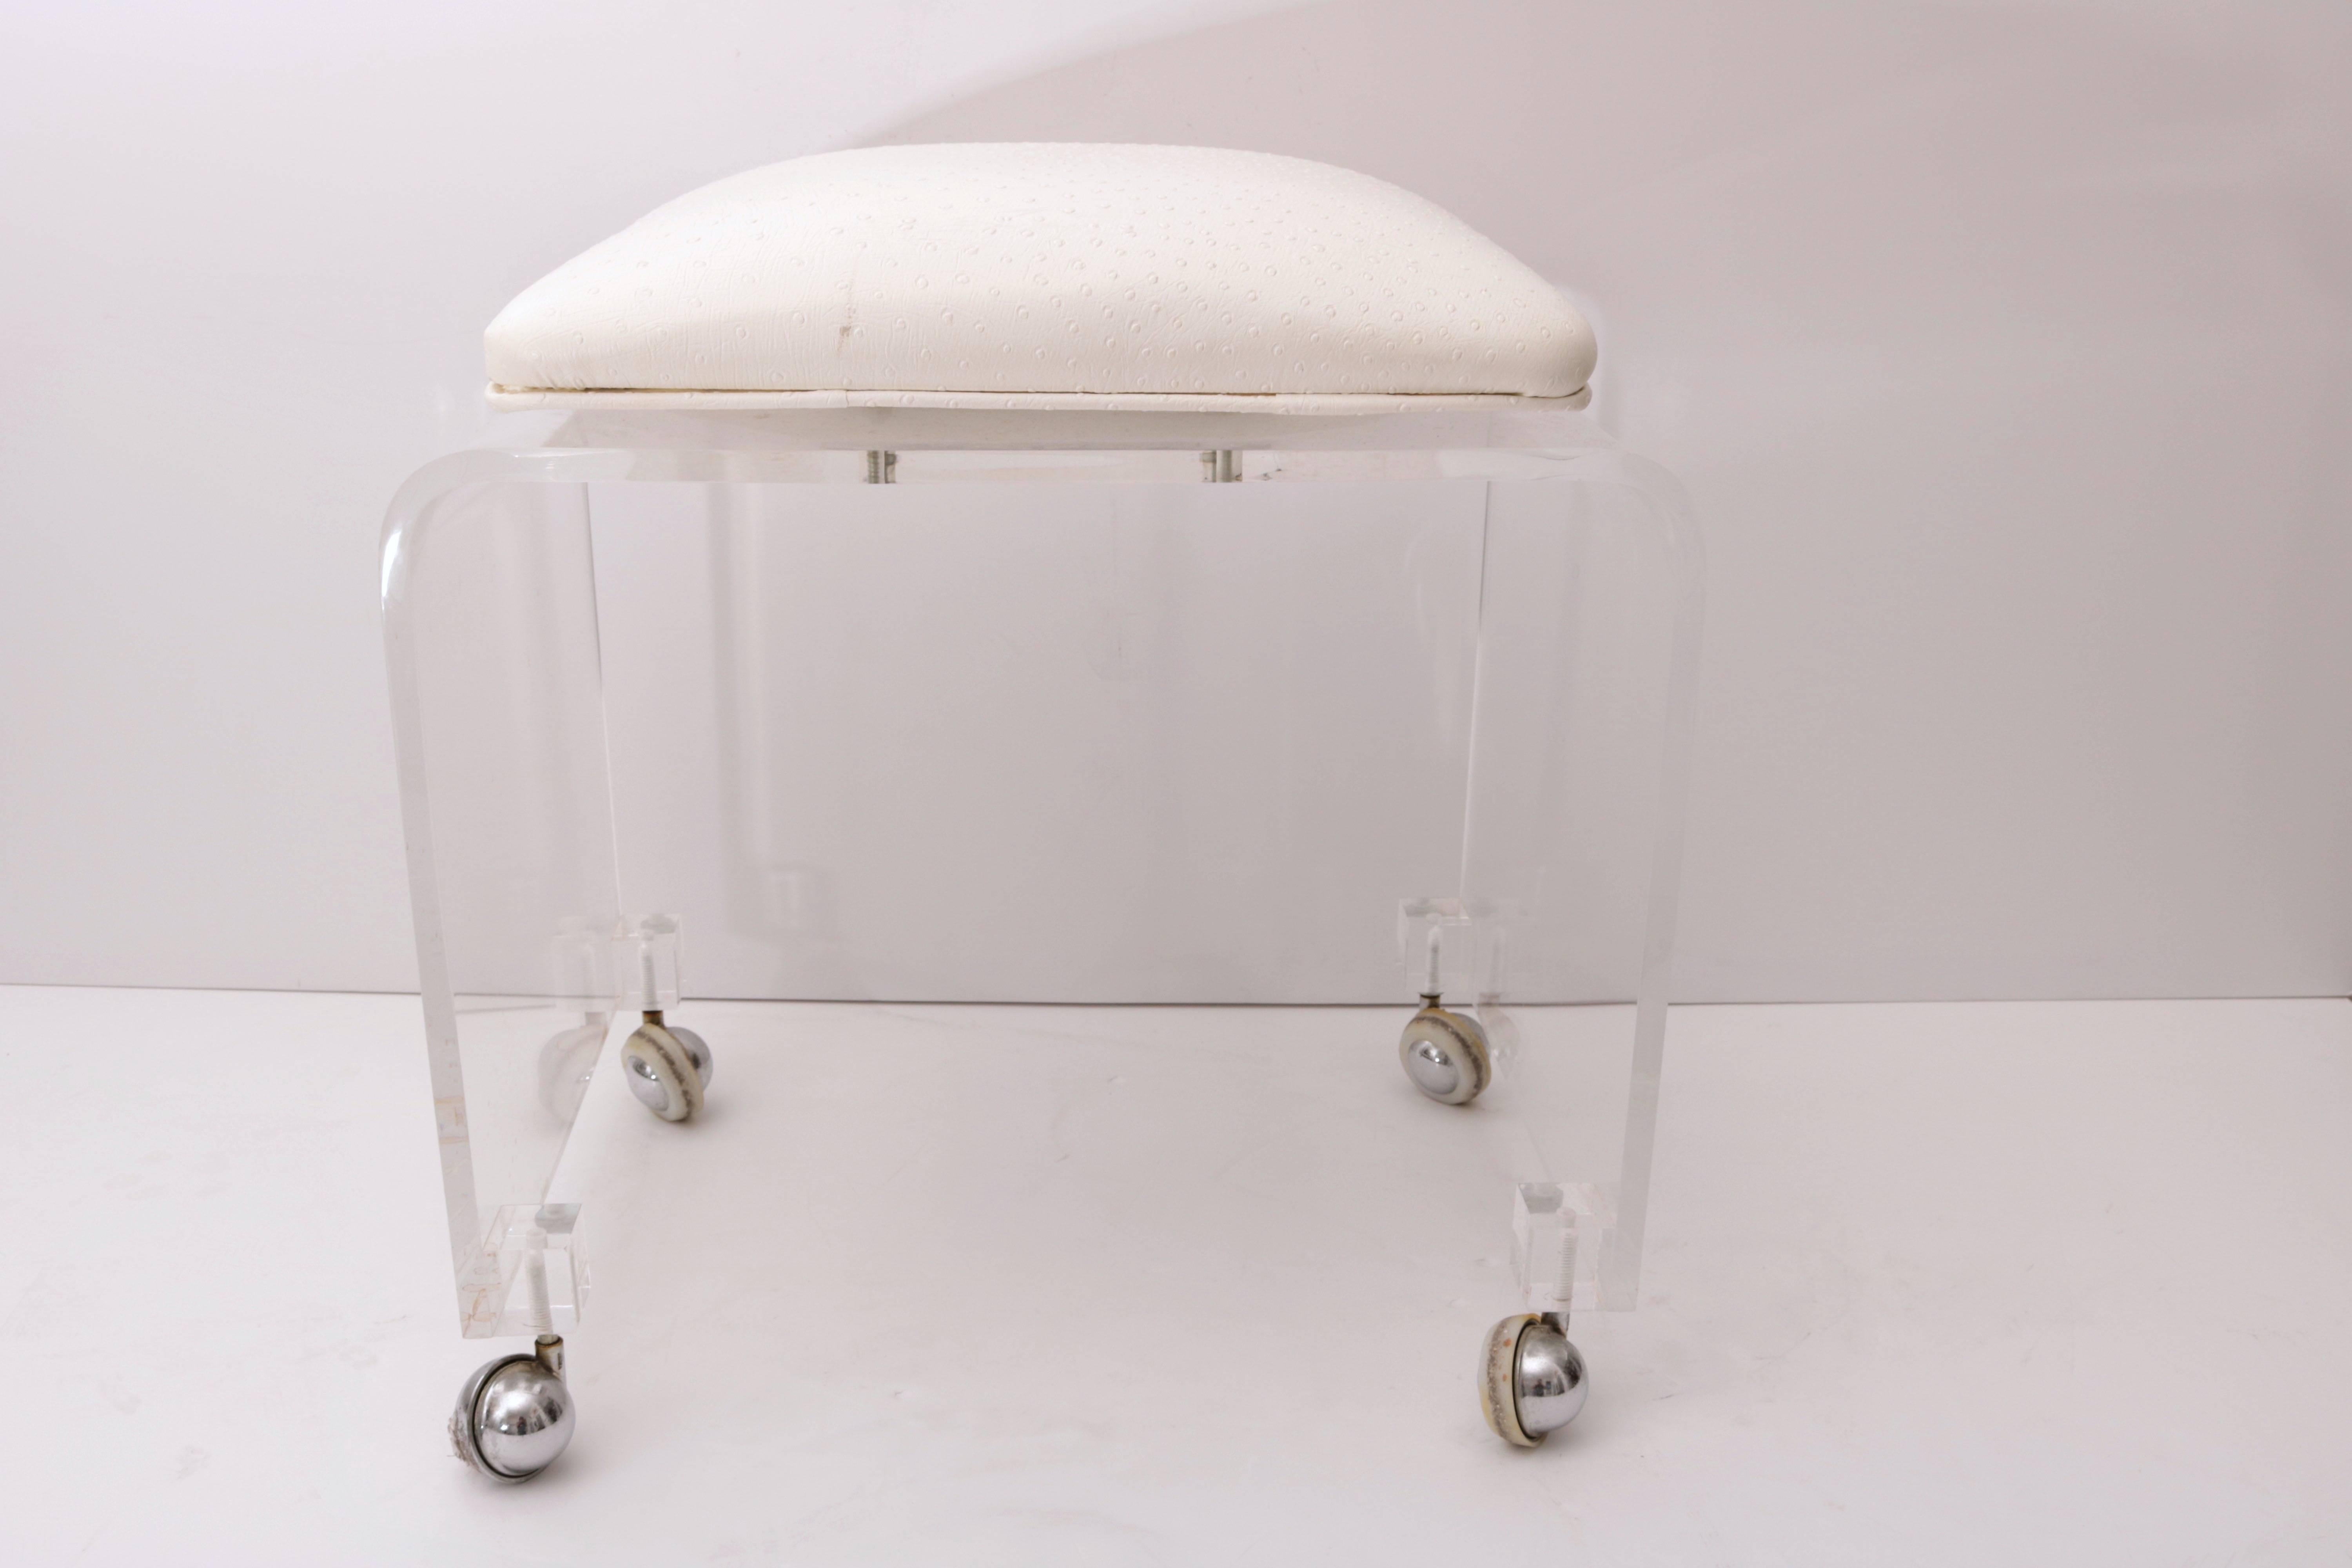 Acrylic Lucite Vanity Stool, Swivel Seat Upholstered in Ostrich Pattern Fabric